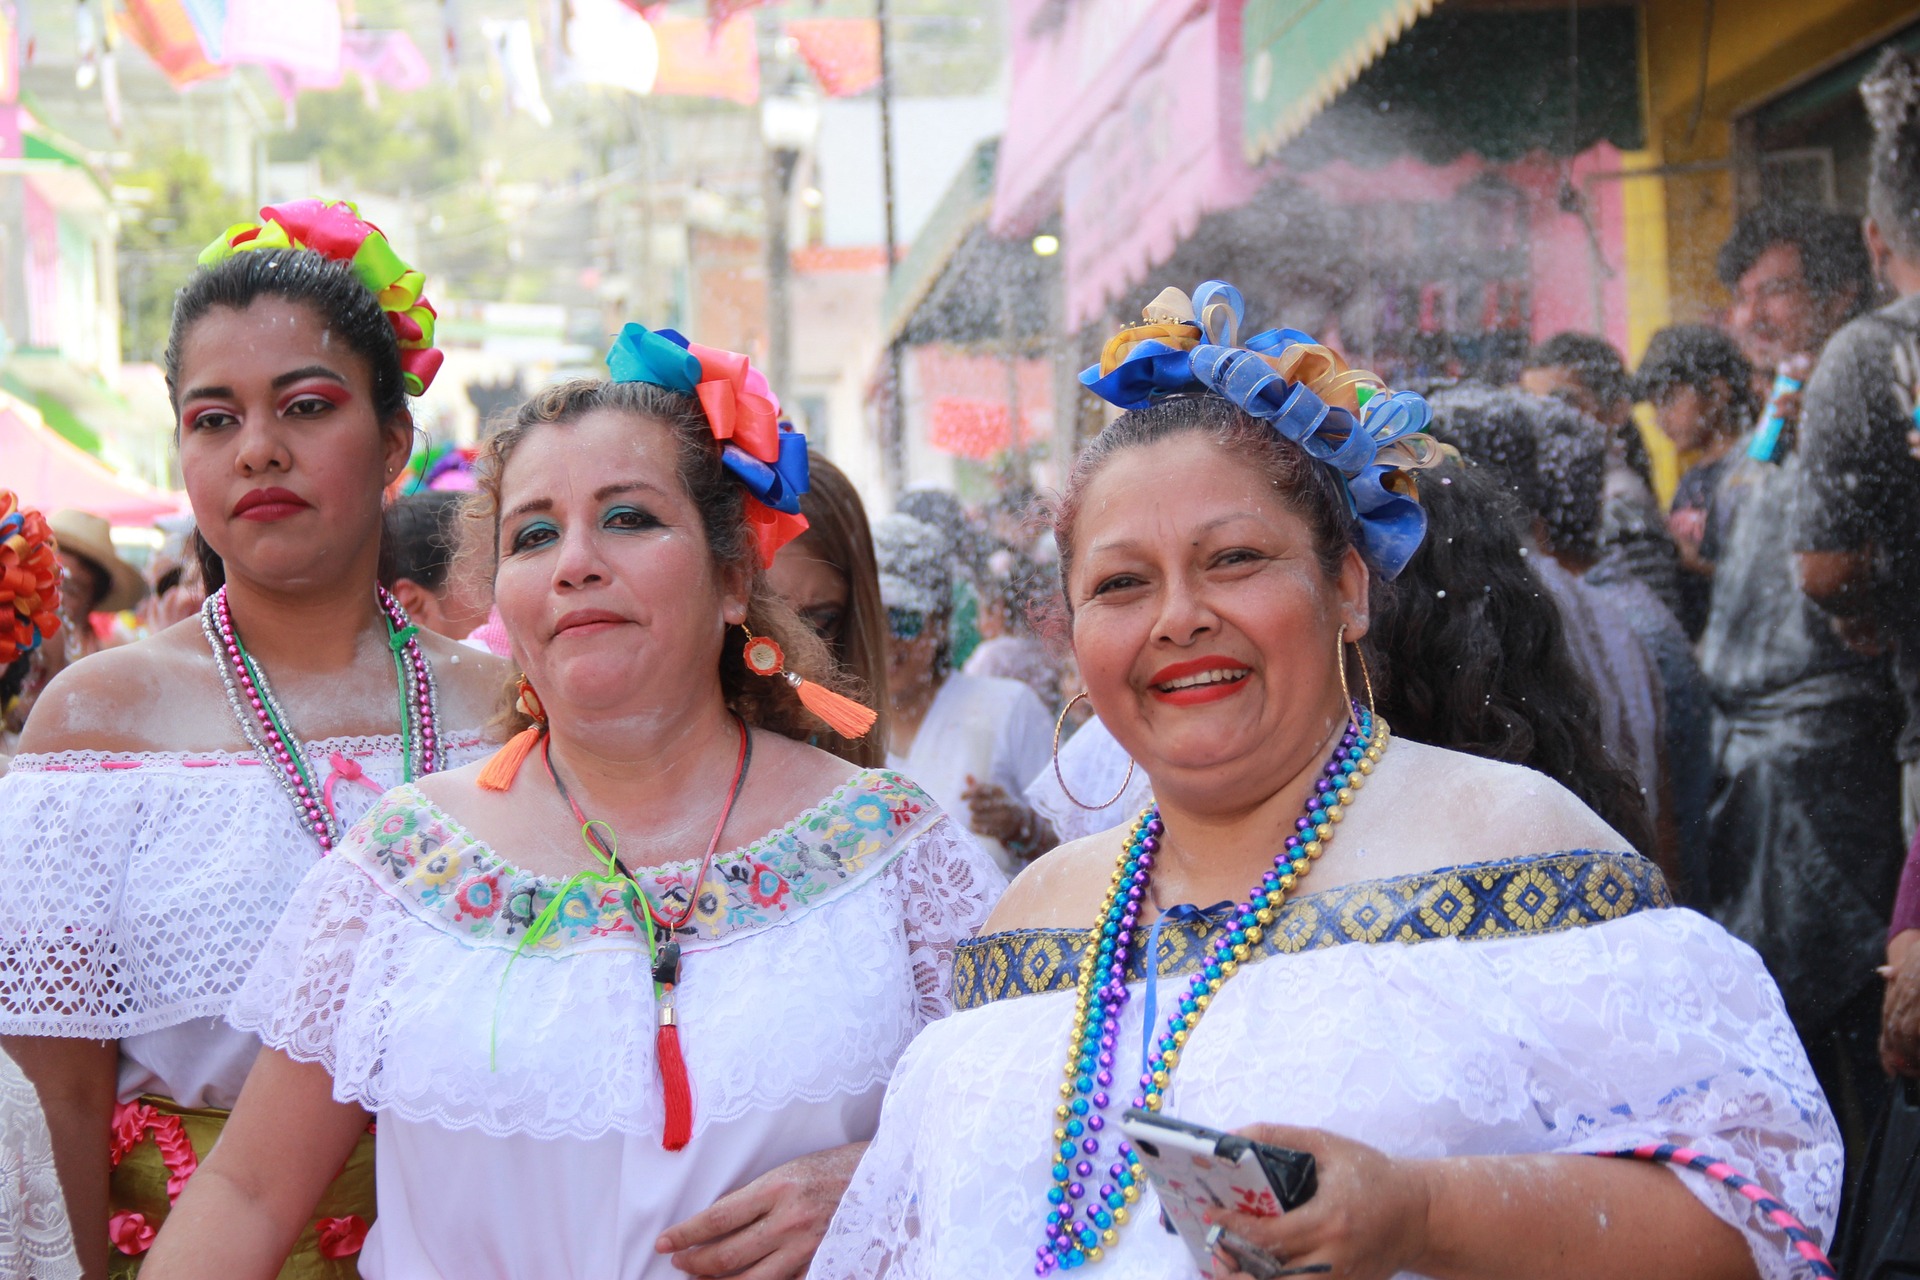 Culture of Mexico Holidays Traditions GlobalGuide.info